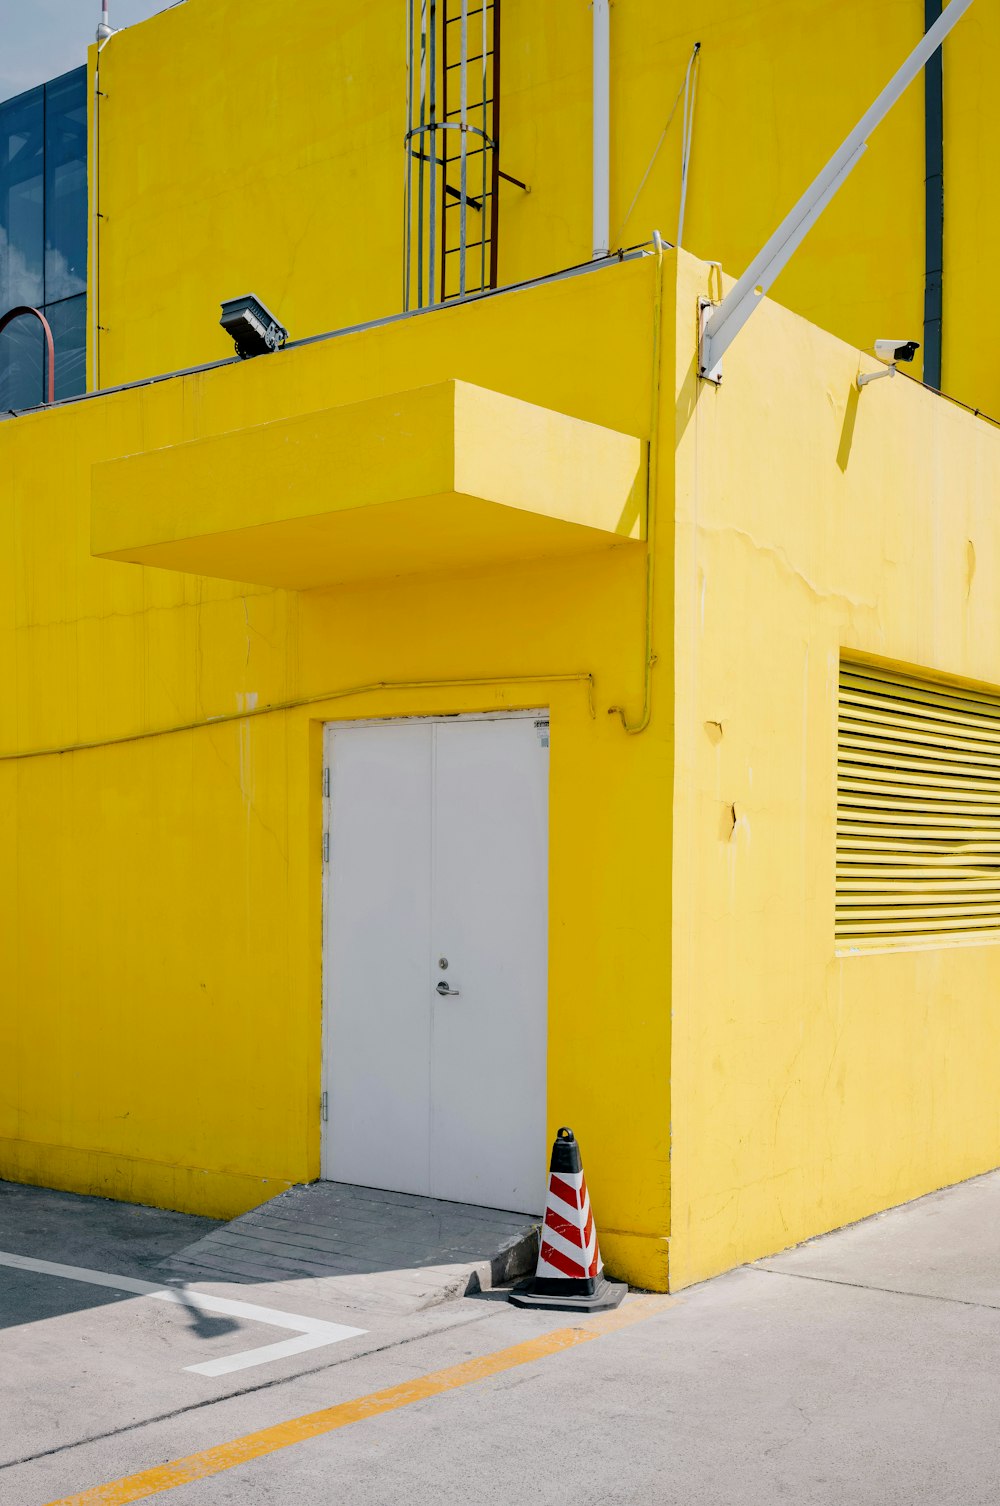 a person sitting on the ground in front of a yellow building